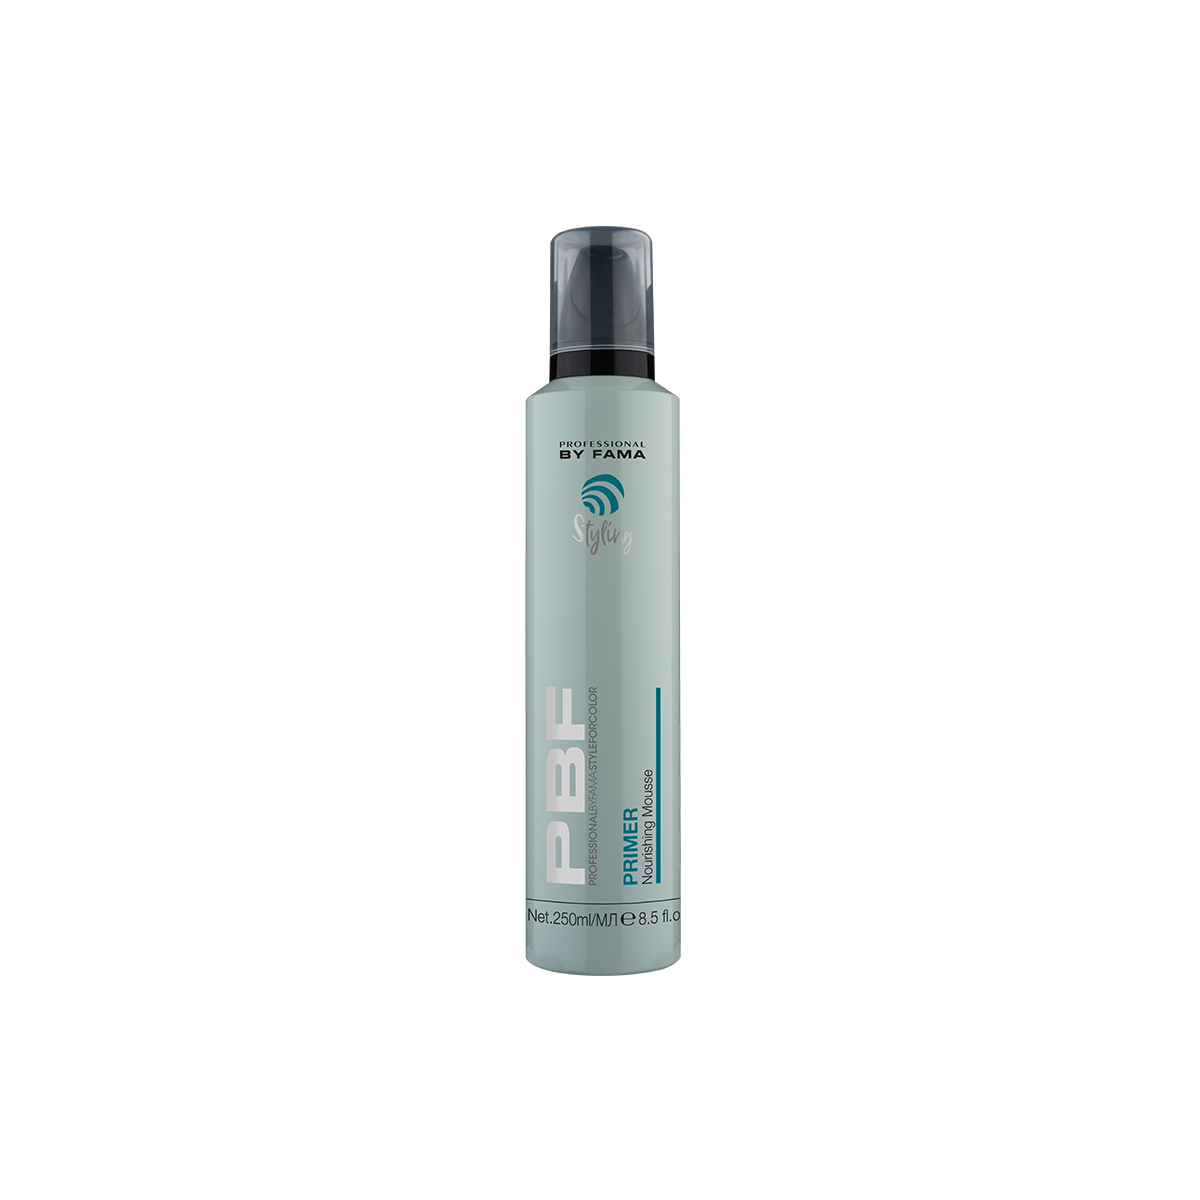 PROFESSIONAL BY FAMA - STYLING - PRIMER - NOURISHING MOUSSE (250 ml)